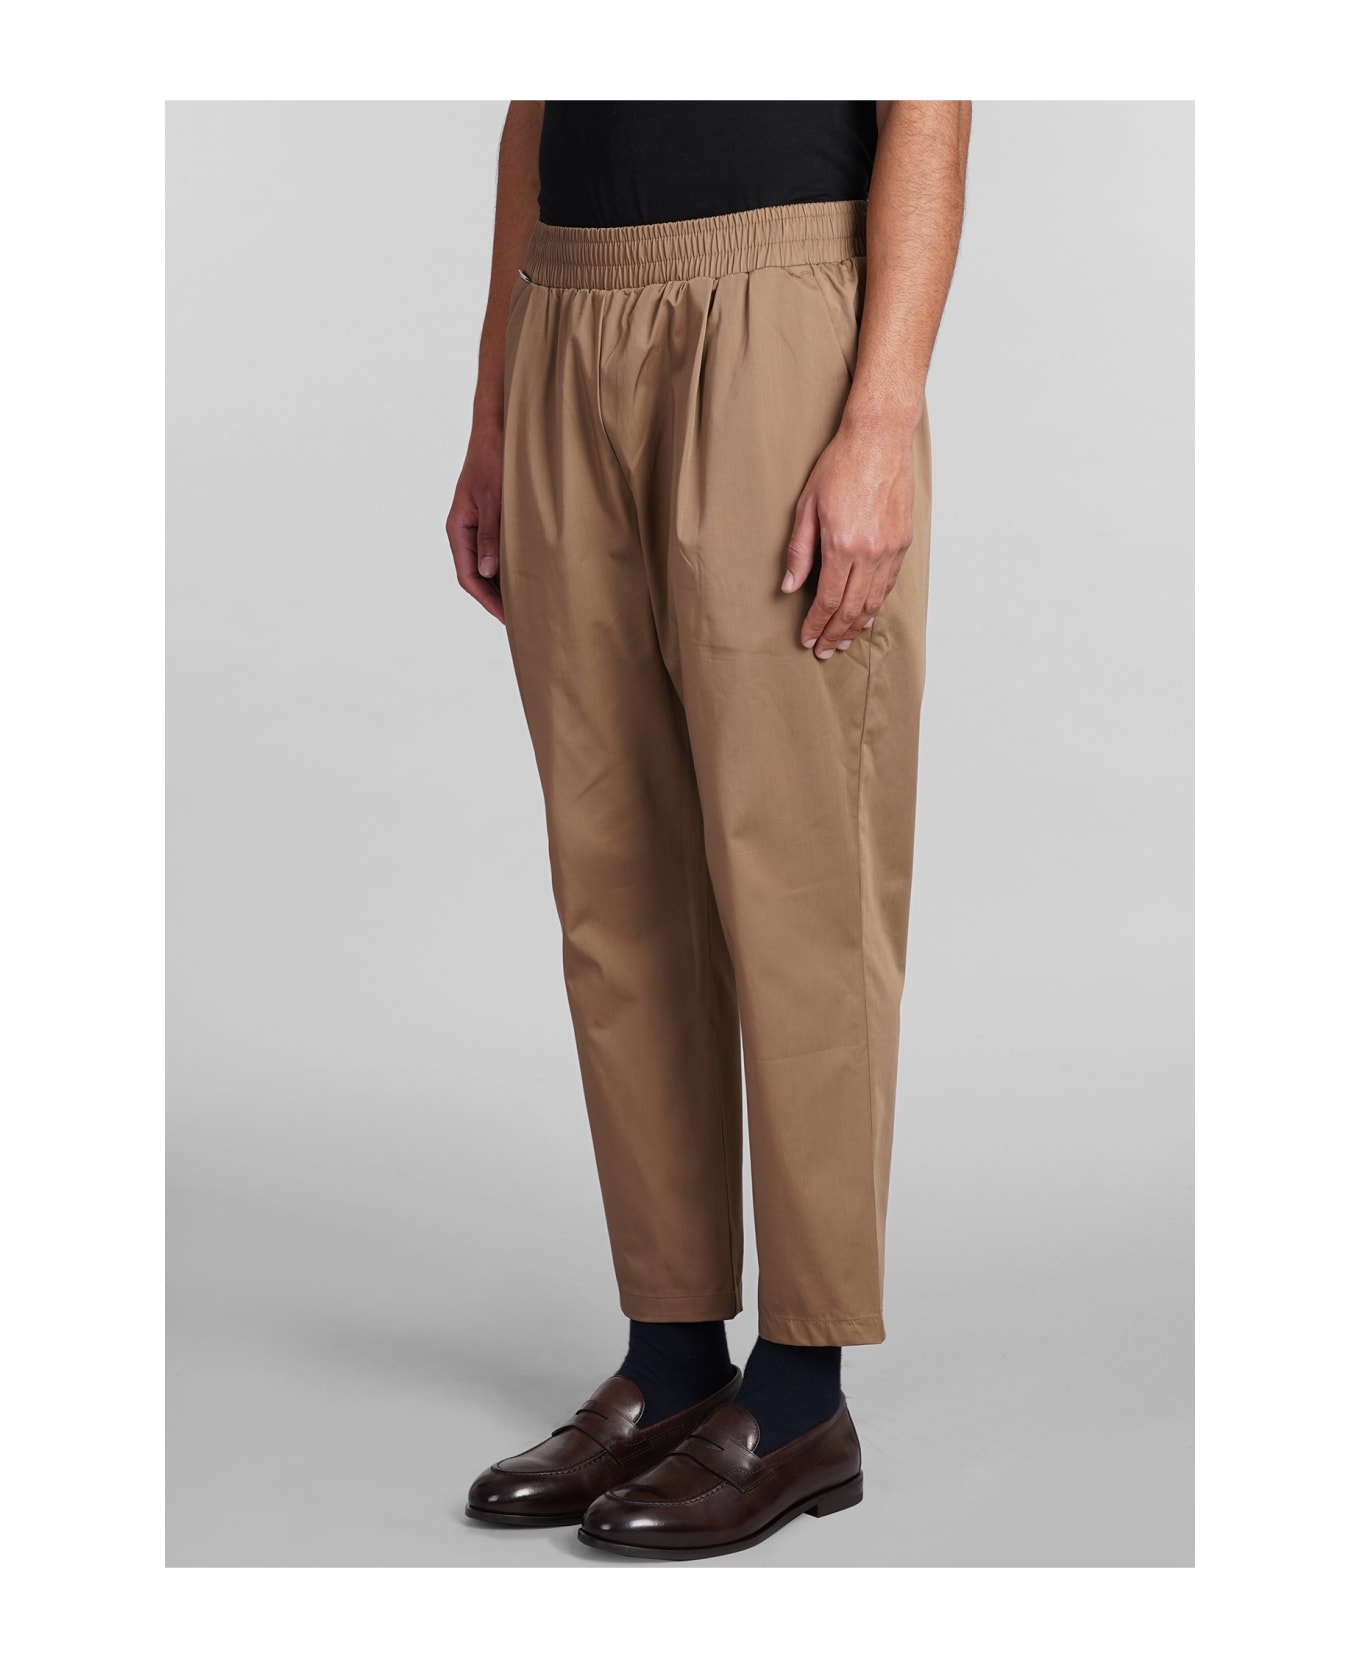 Family First Milano Pants In Camel Cotton - Camel